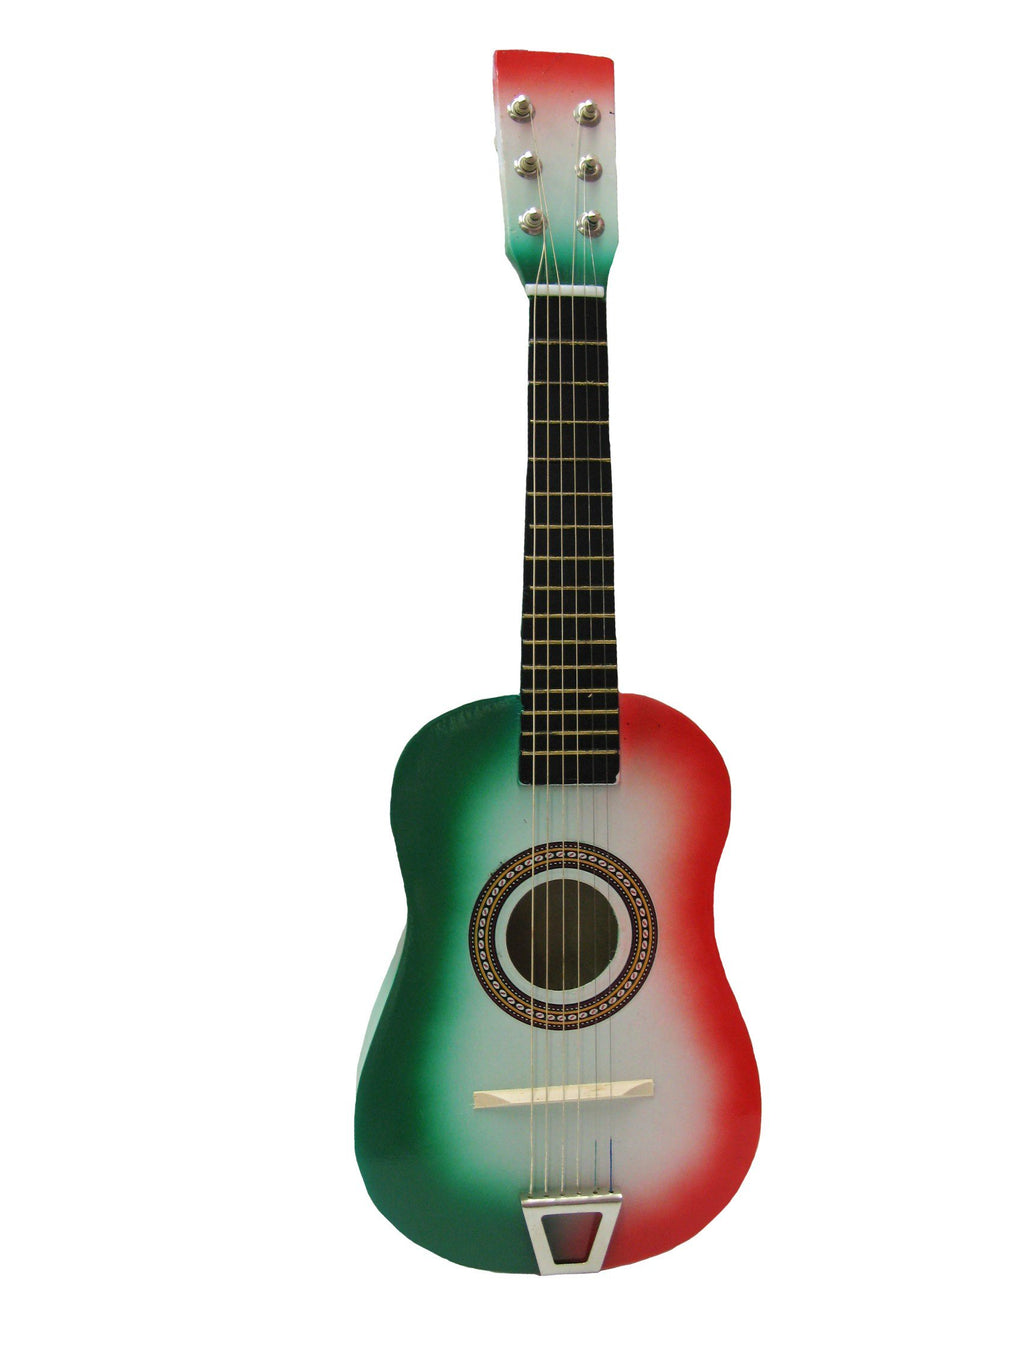 202-MFG 23 inch Acoustic Guitar - Red-White-Green